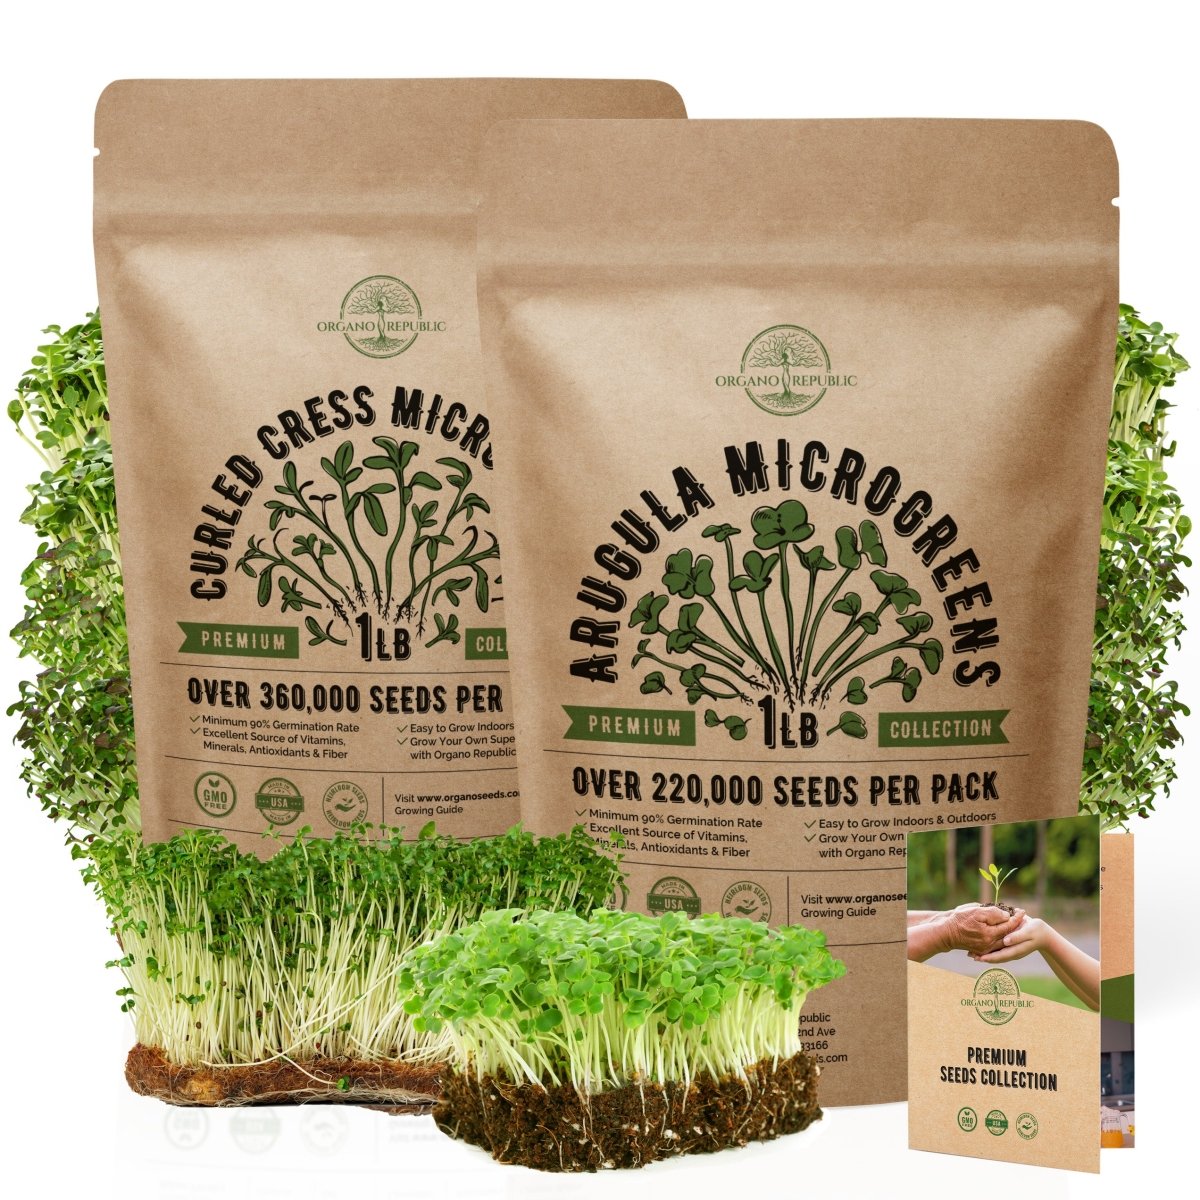 Cress & Arugula Microgreens Seeds Bundle Non-GMO Heirloom Seeds for Planting Indoor and Outdoor Over 580,000 Microgreen & Sprouting Seeds in One Value Bundle - Organo Republic